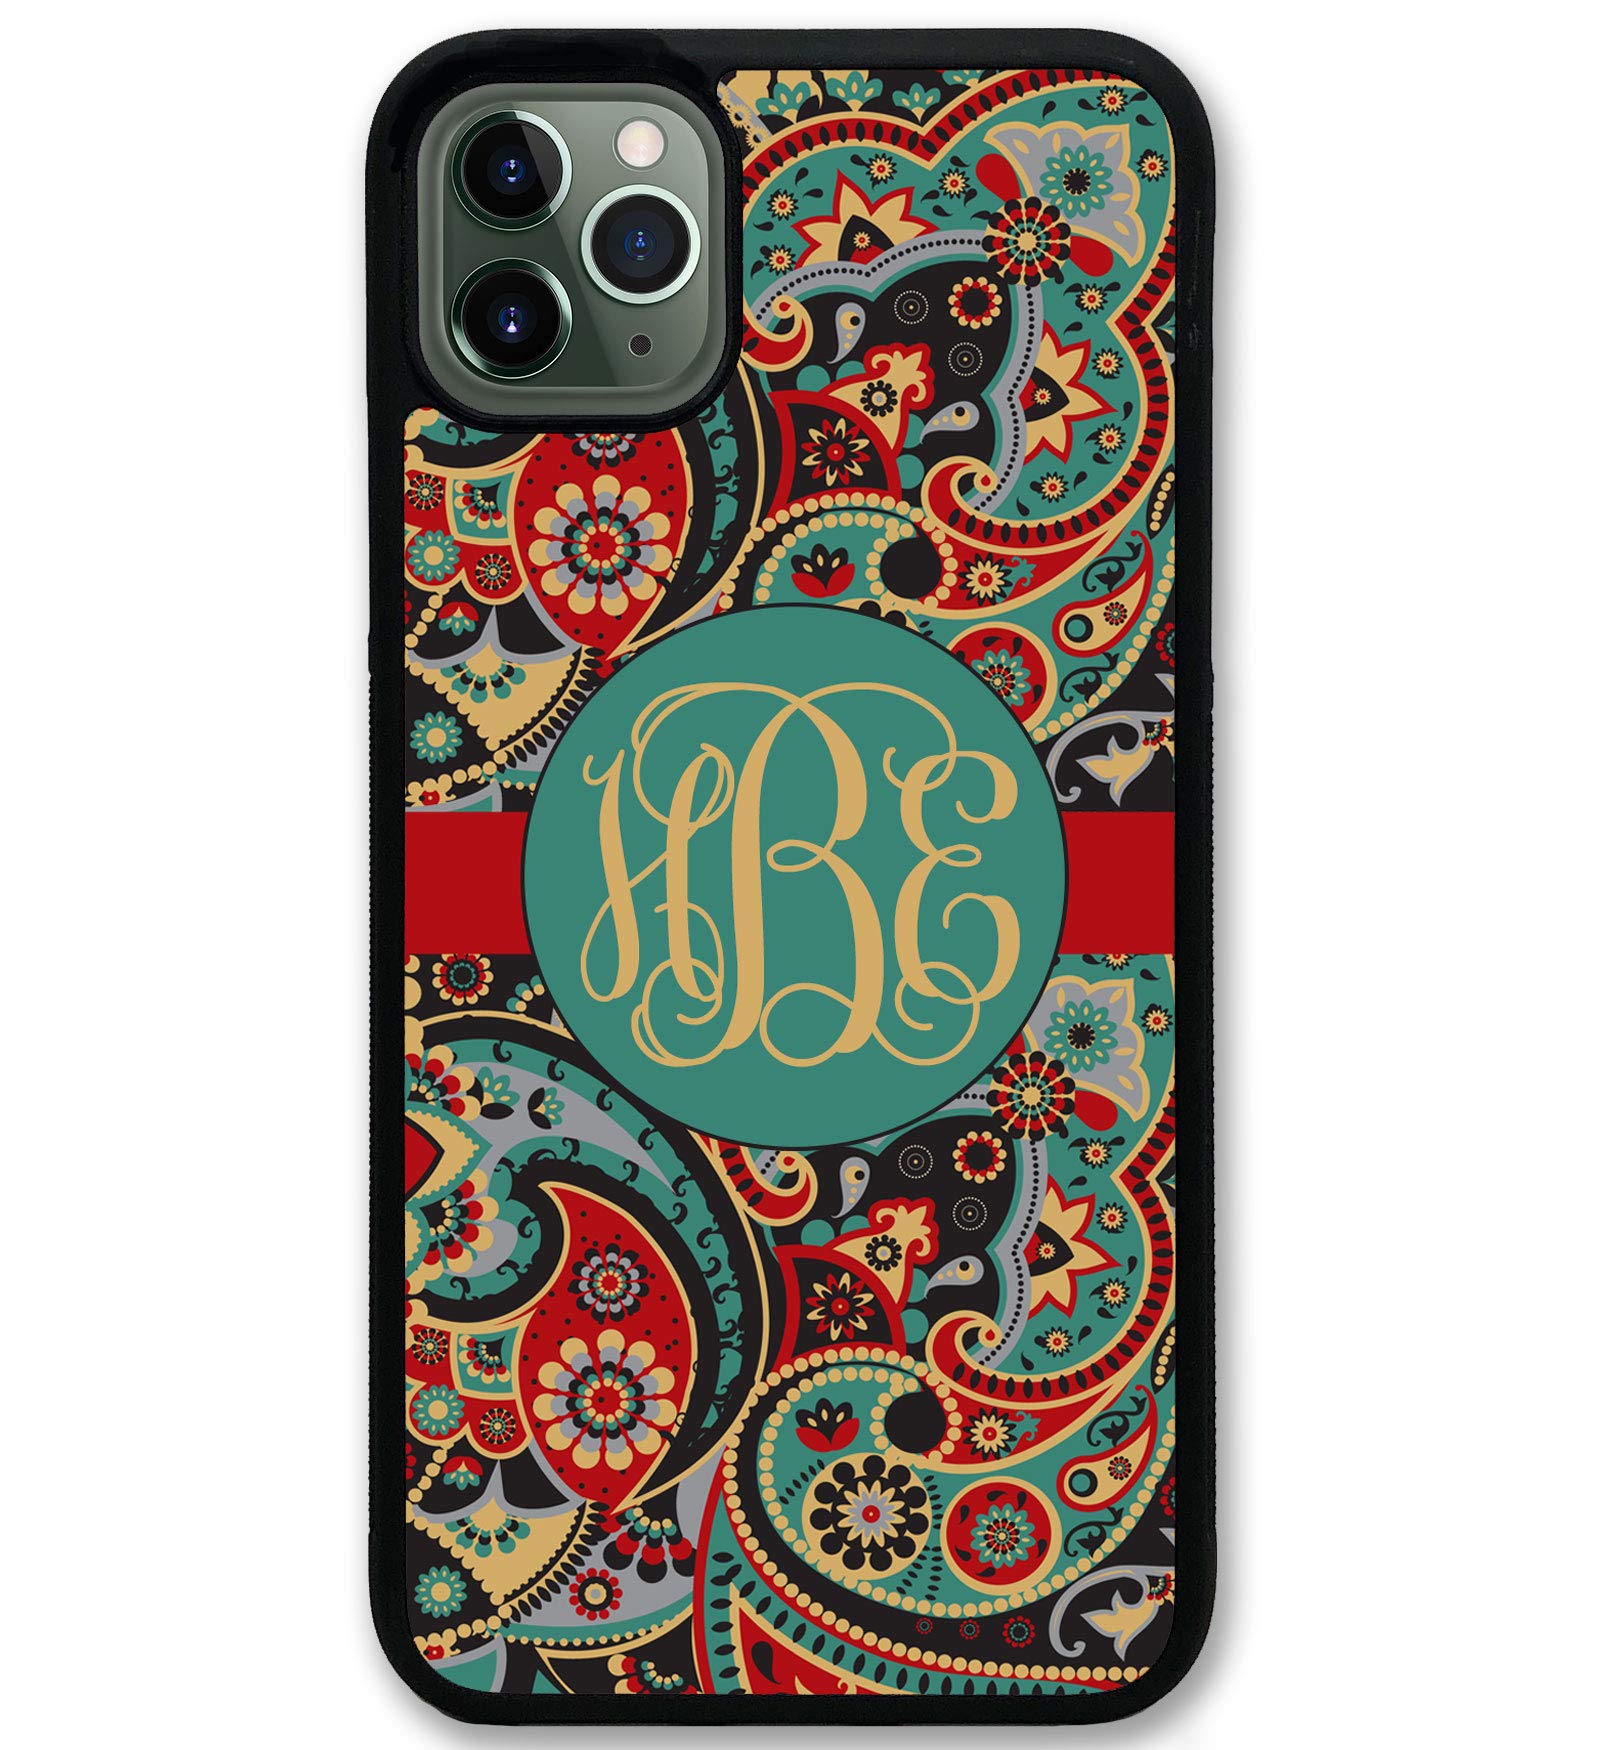 Simply Customized iPhone 11, Phone Case Compatible with iPhone 11 [6.1 inch] Paisley Teal Monogrammed Personalized IP11